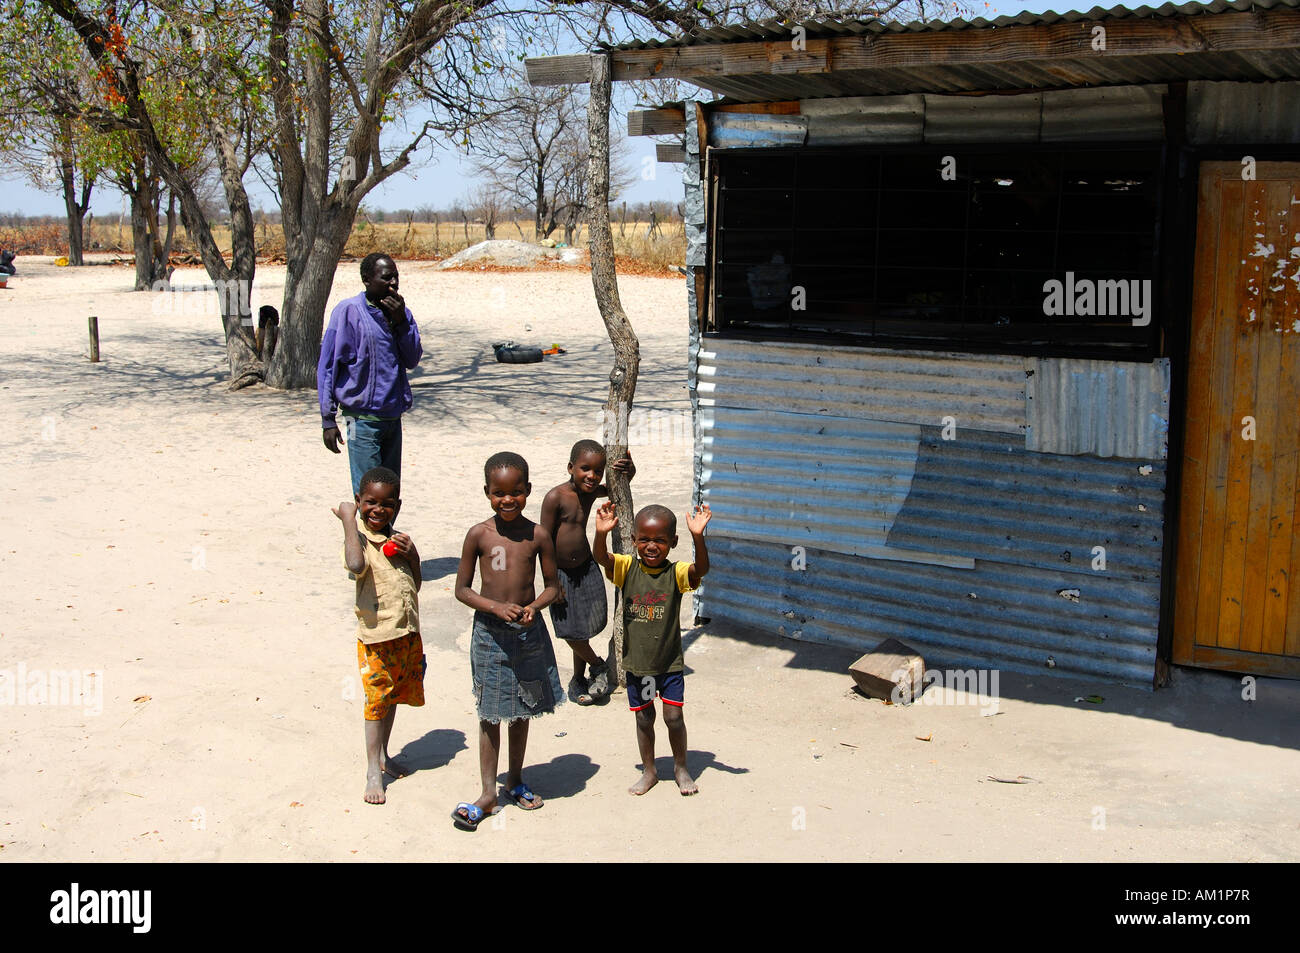 Smiling African kids in front of a poor dwelling, Botswana Stock Photo